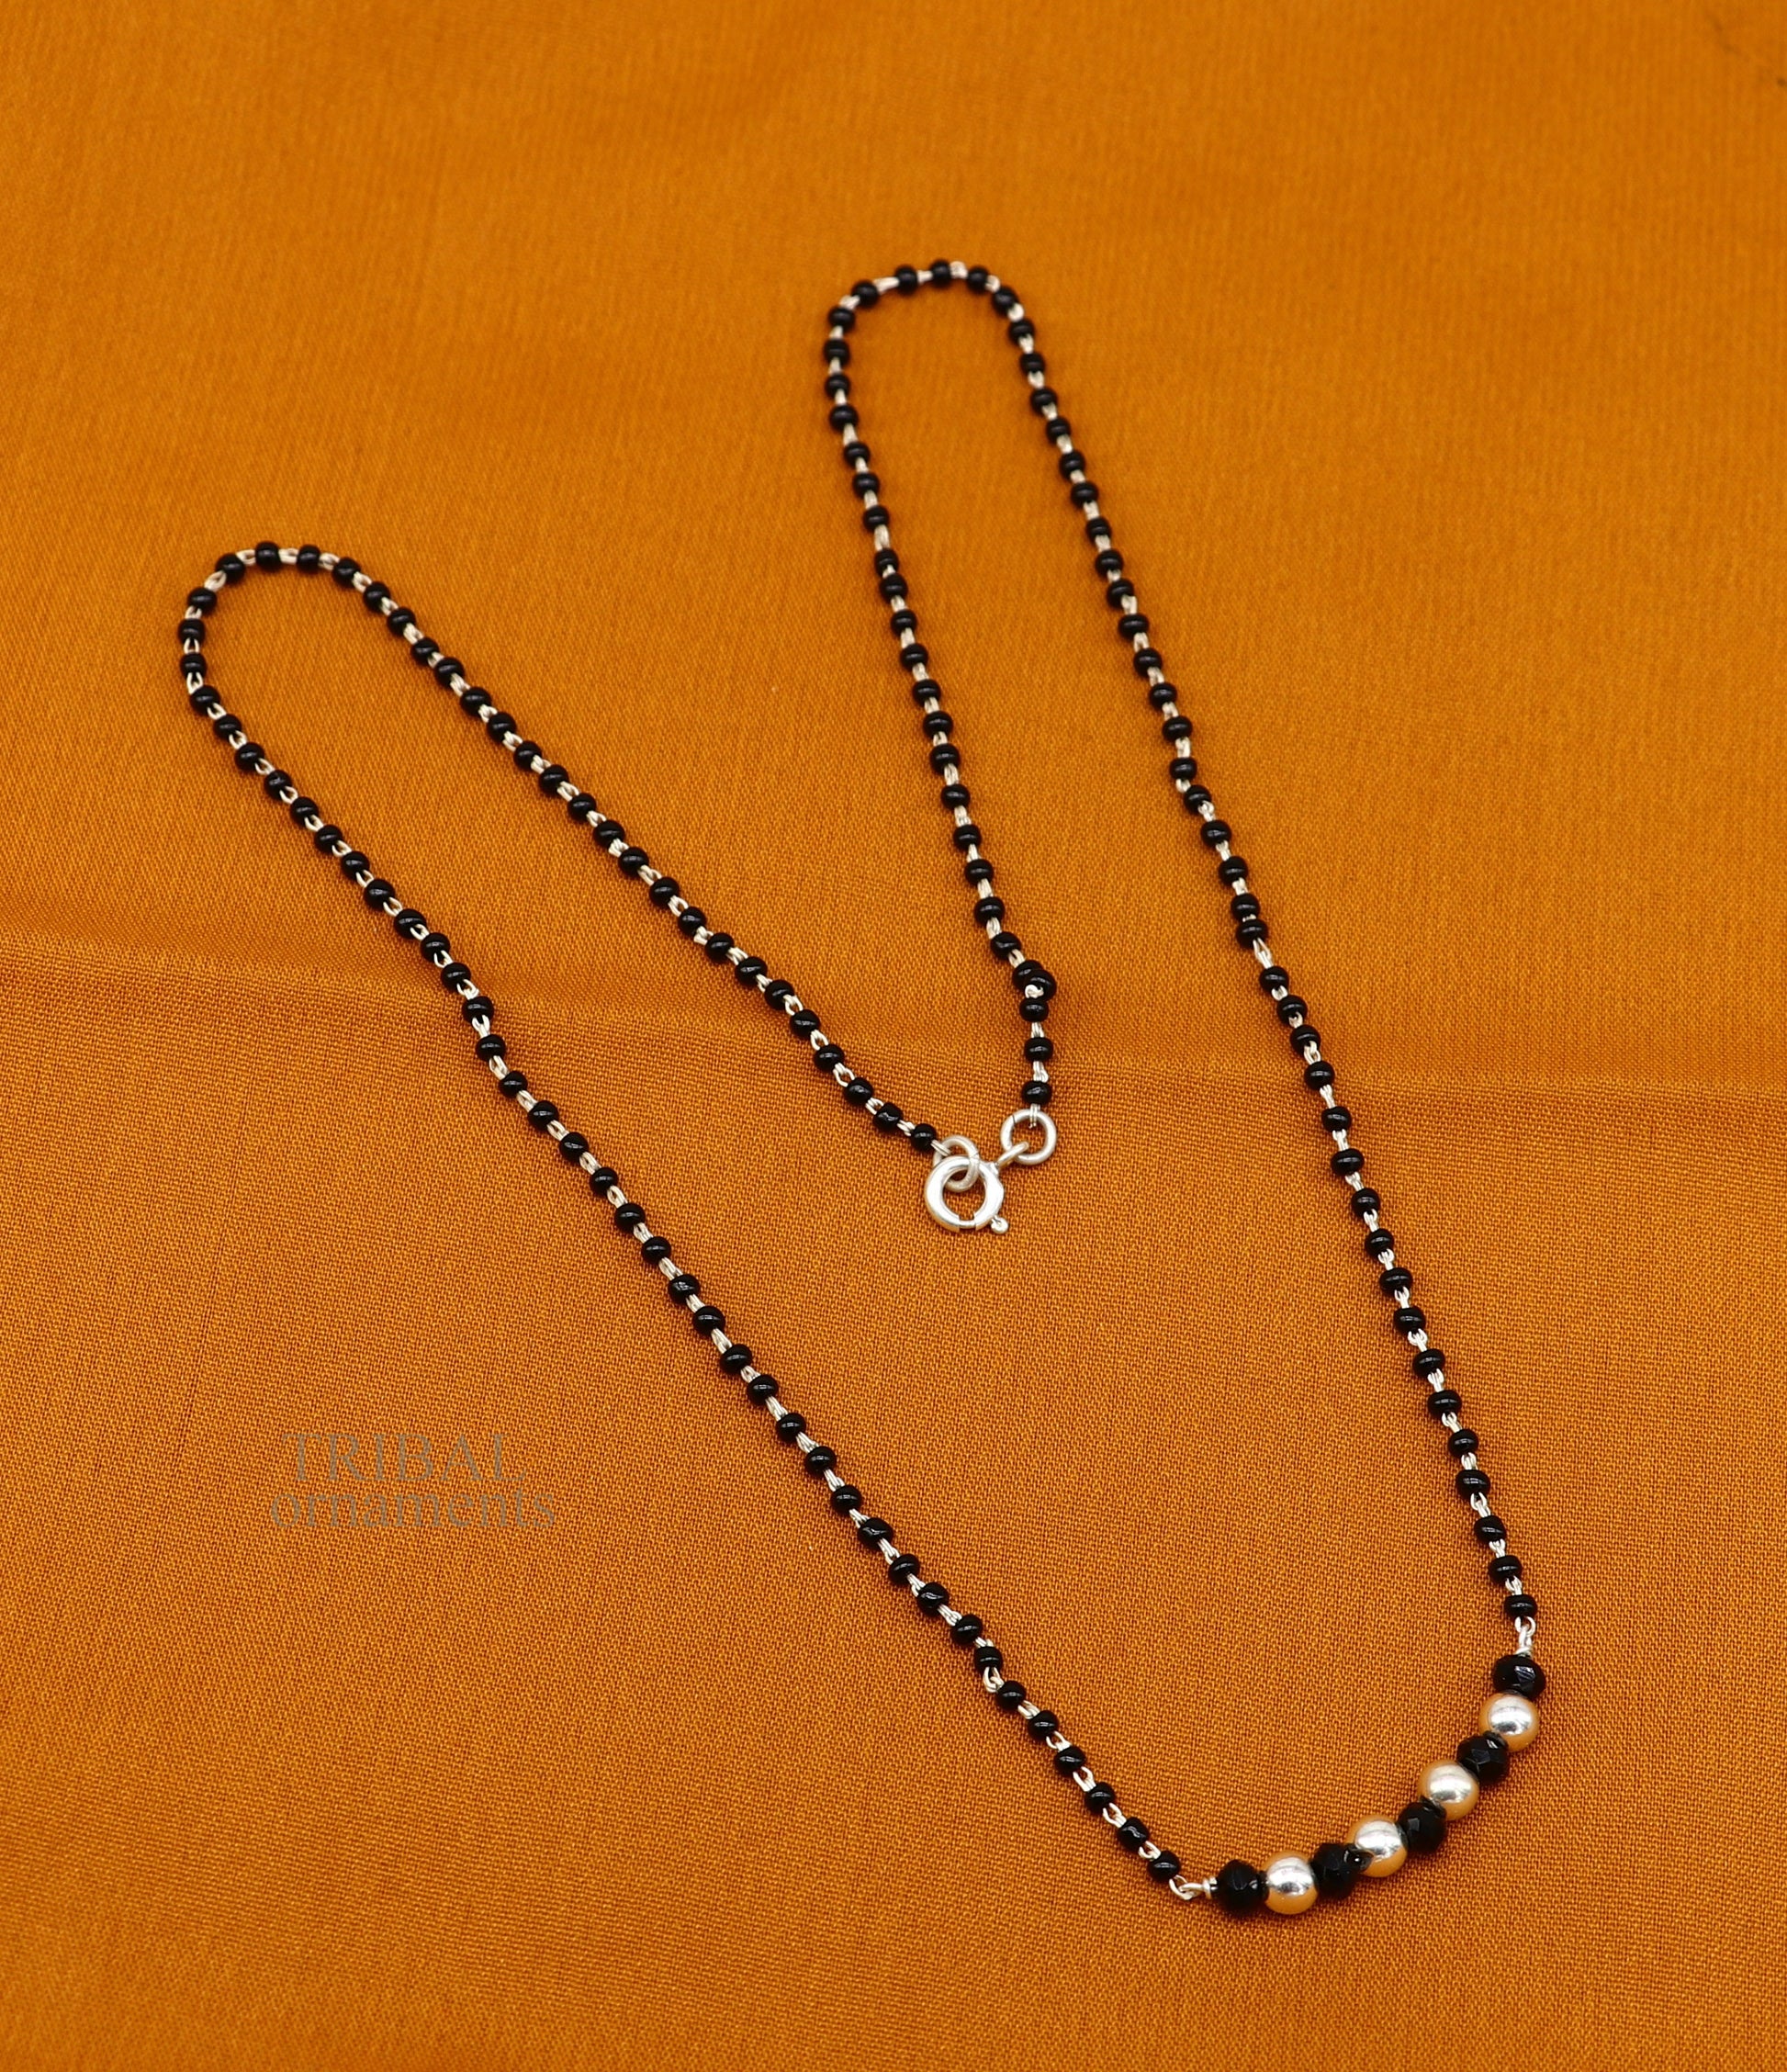 Elegant 925 sterling silver black beads chain necklace, gorgeous small stone design pendant, Mangalsutra chain beaded necklace set328 - TRIBAL ORNAMENTS